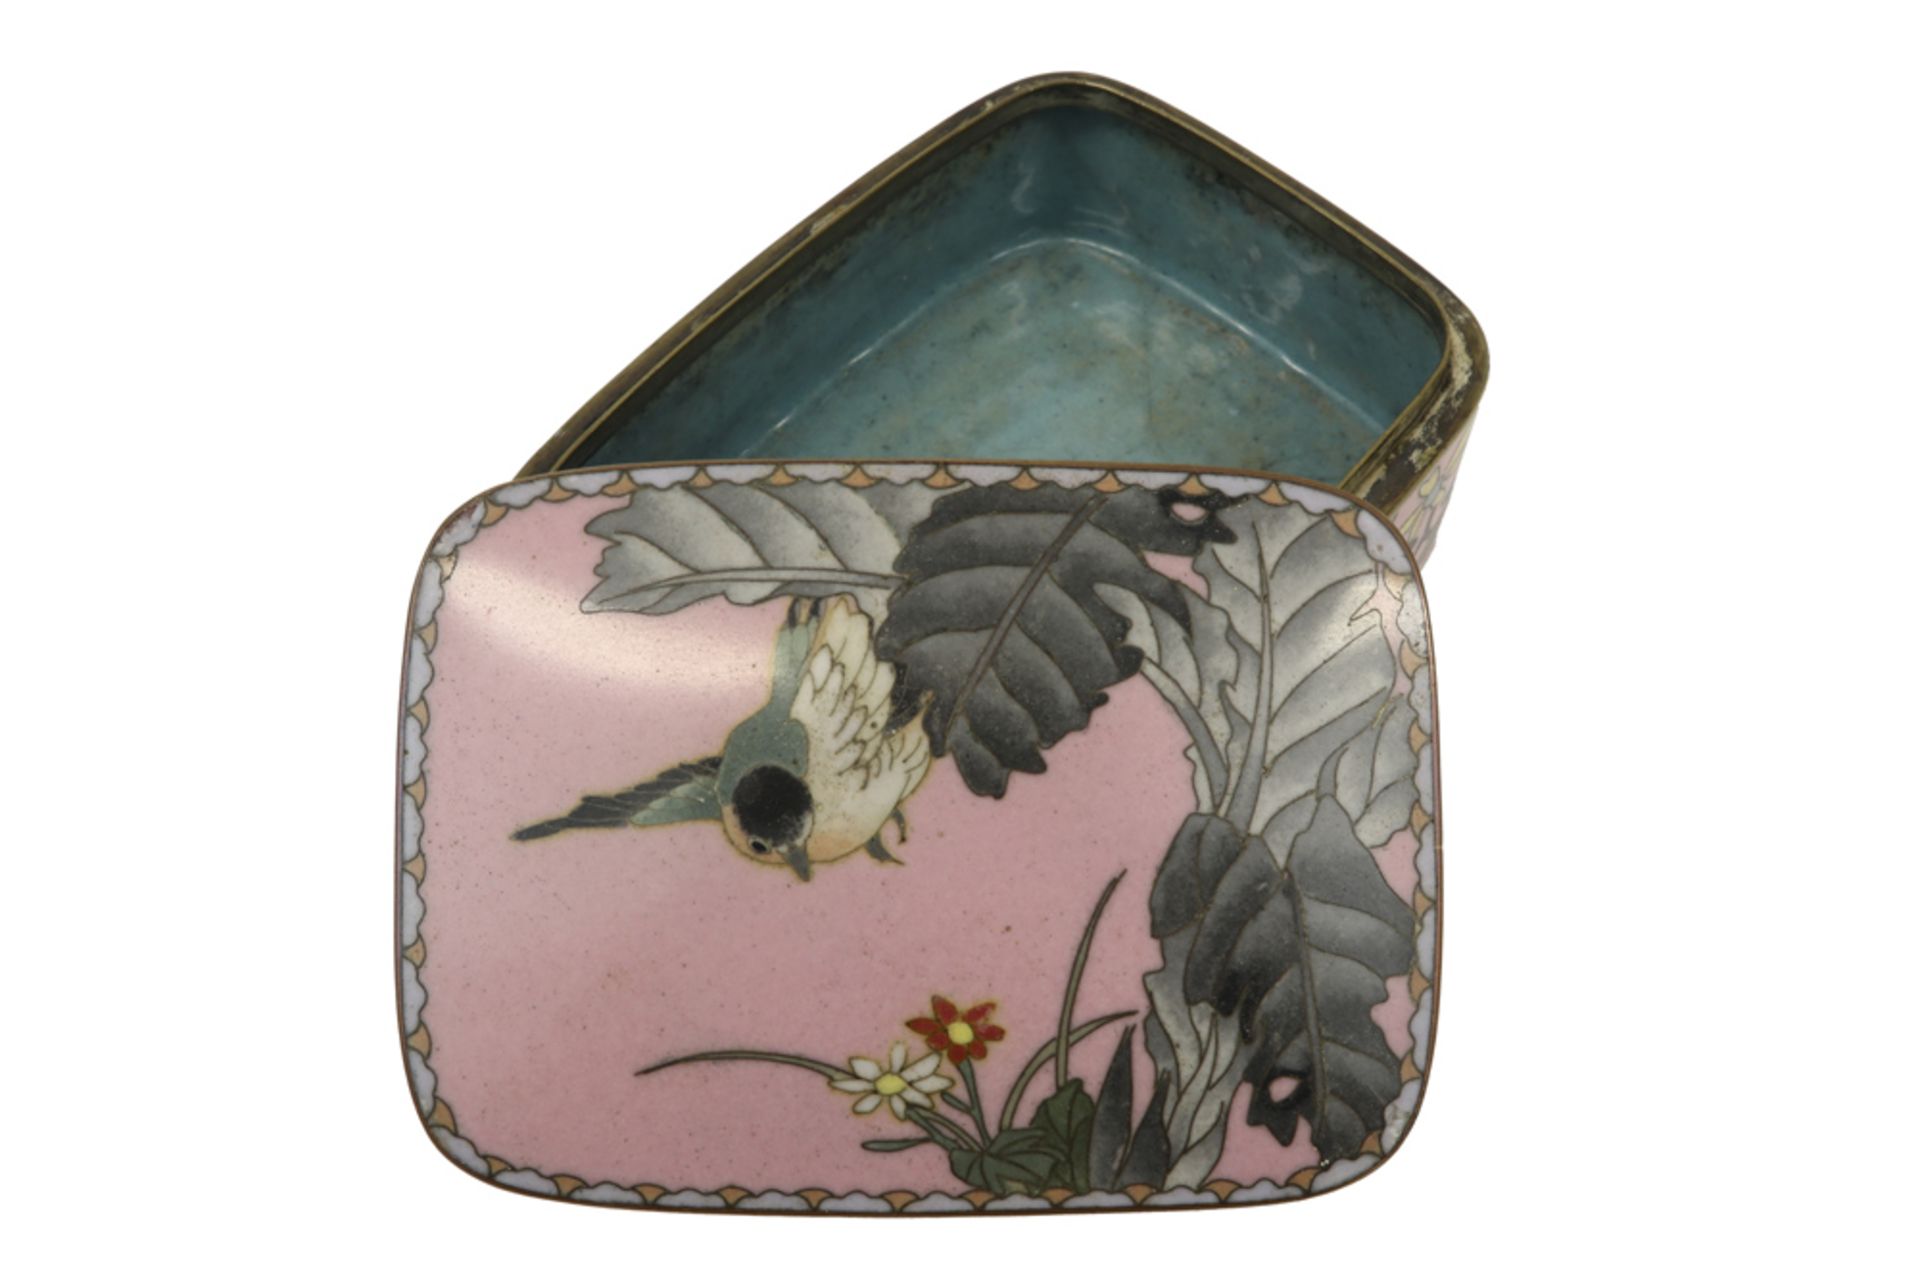 19th Cent. Chinese Qing period box in cloisonné with a polychrome birds and flowers decor || - Image 2 of 4